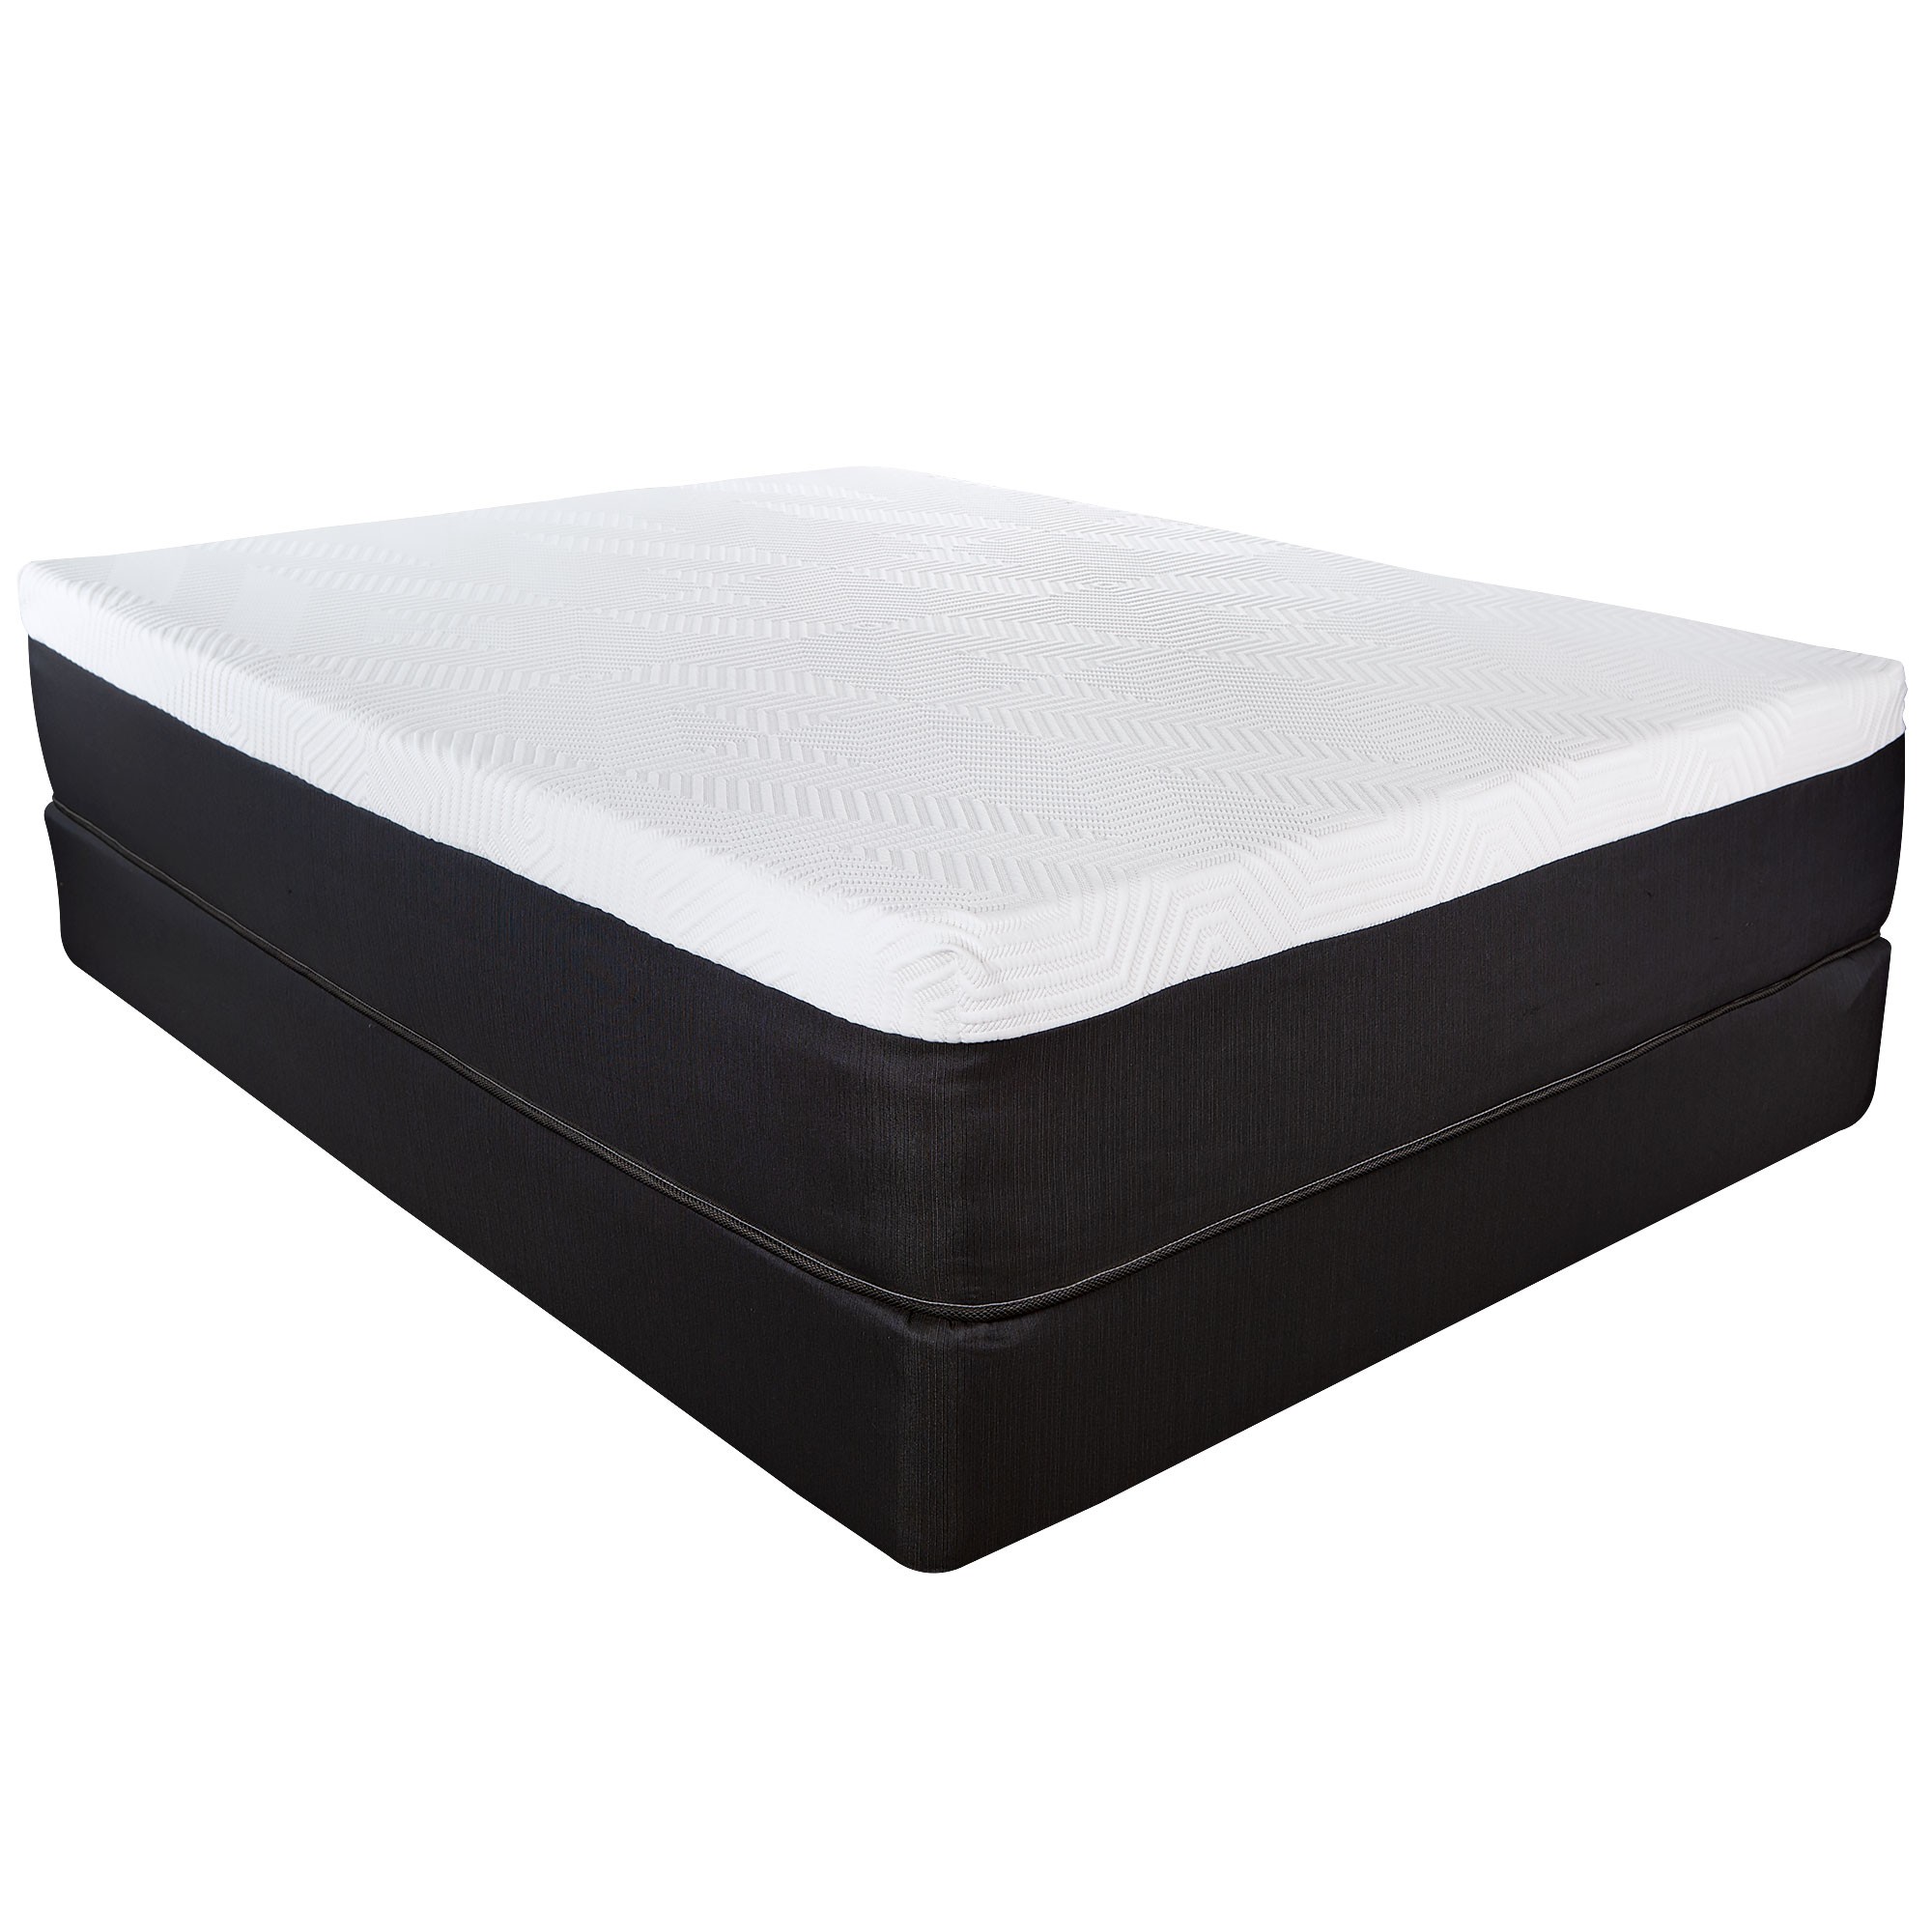 13" Hybrid Lux Memory Foam And Wrapped Coil Mattress Full-391677-1